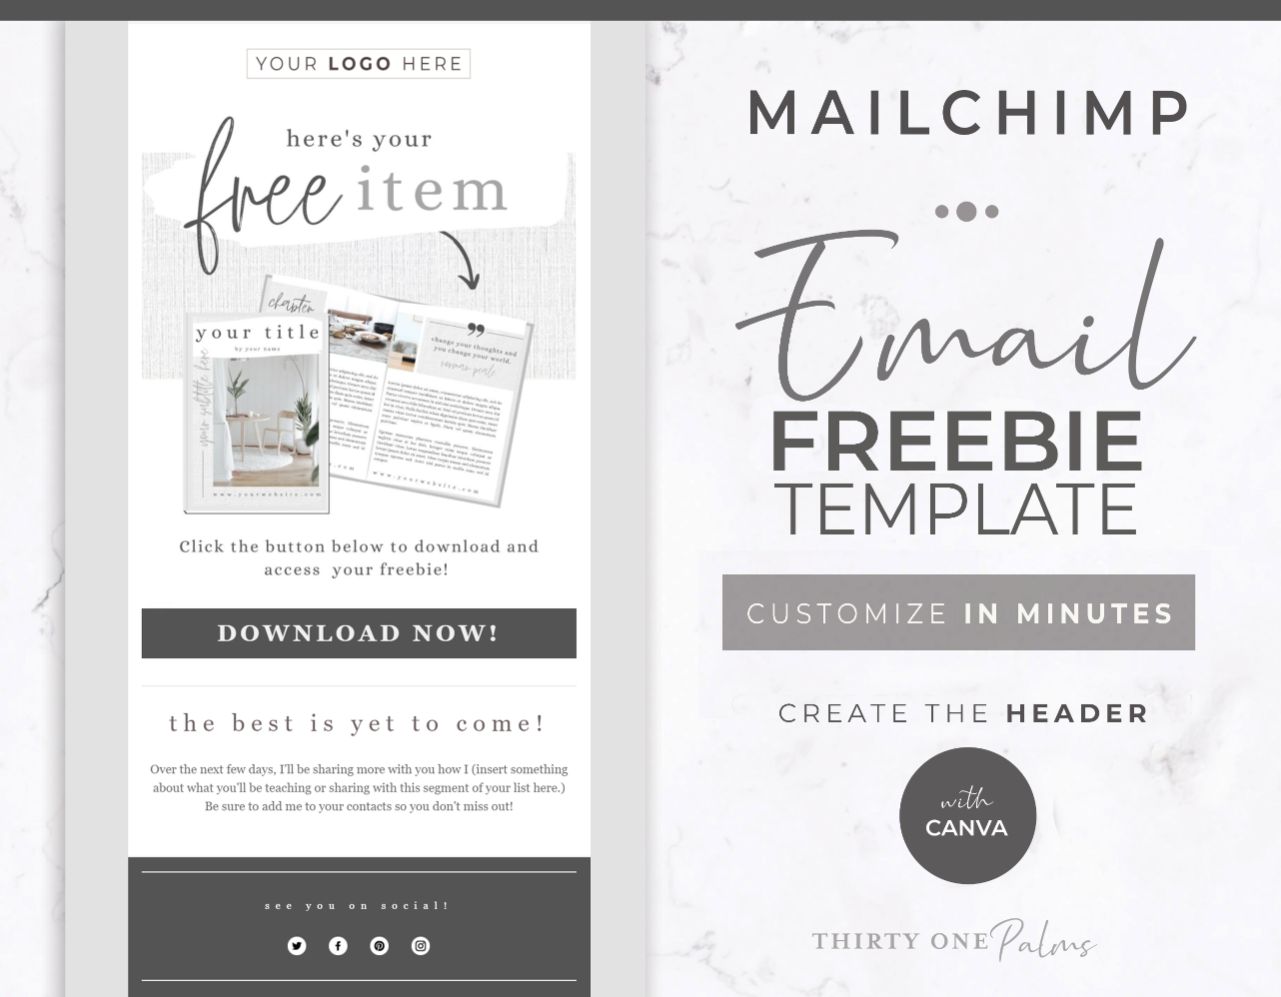 Email Template for Canva & Mailchimp - Freebie - White Linen